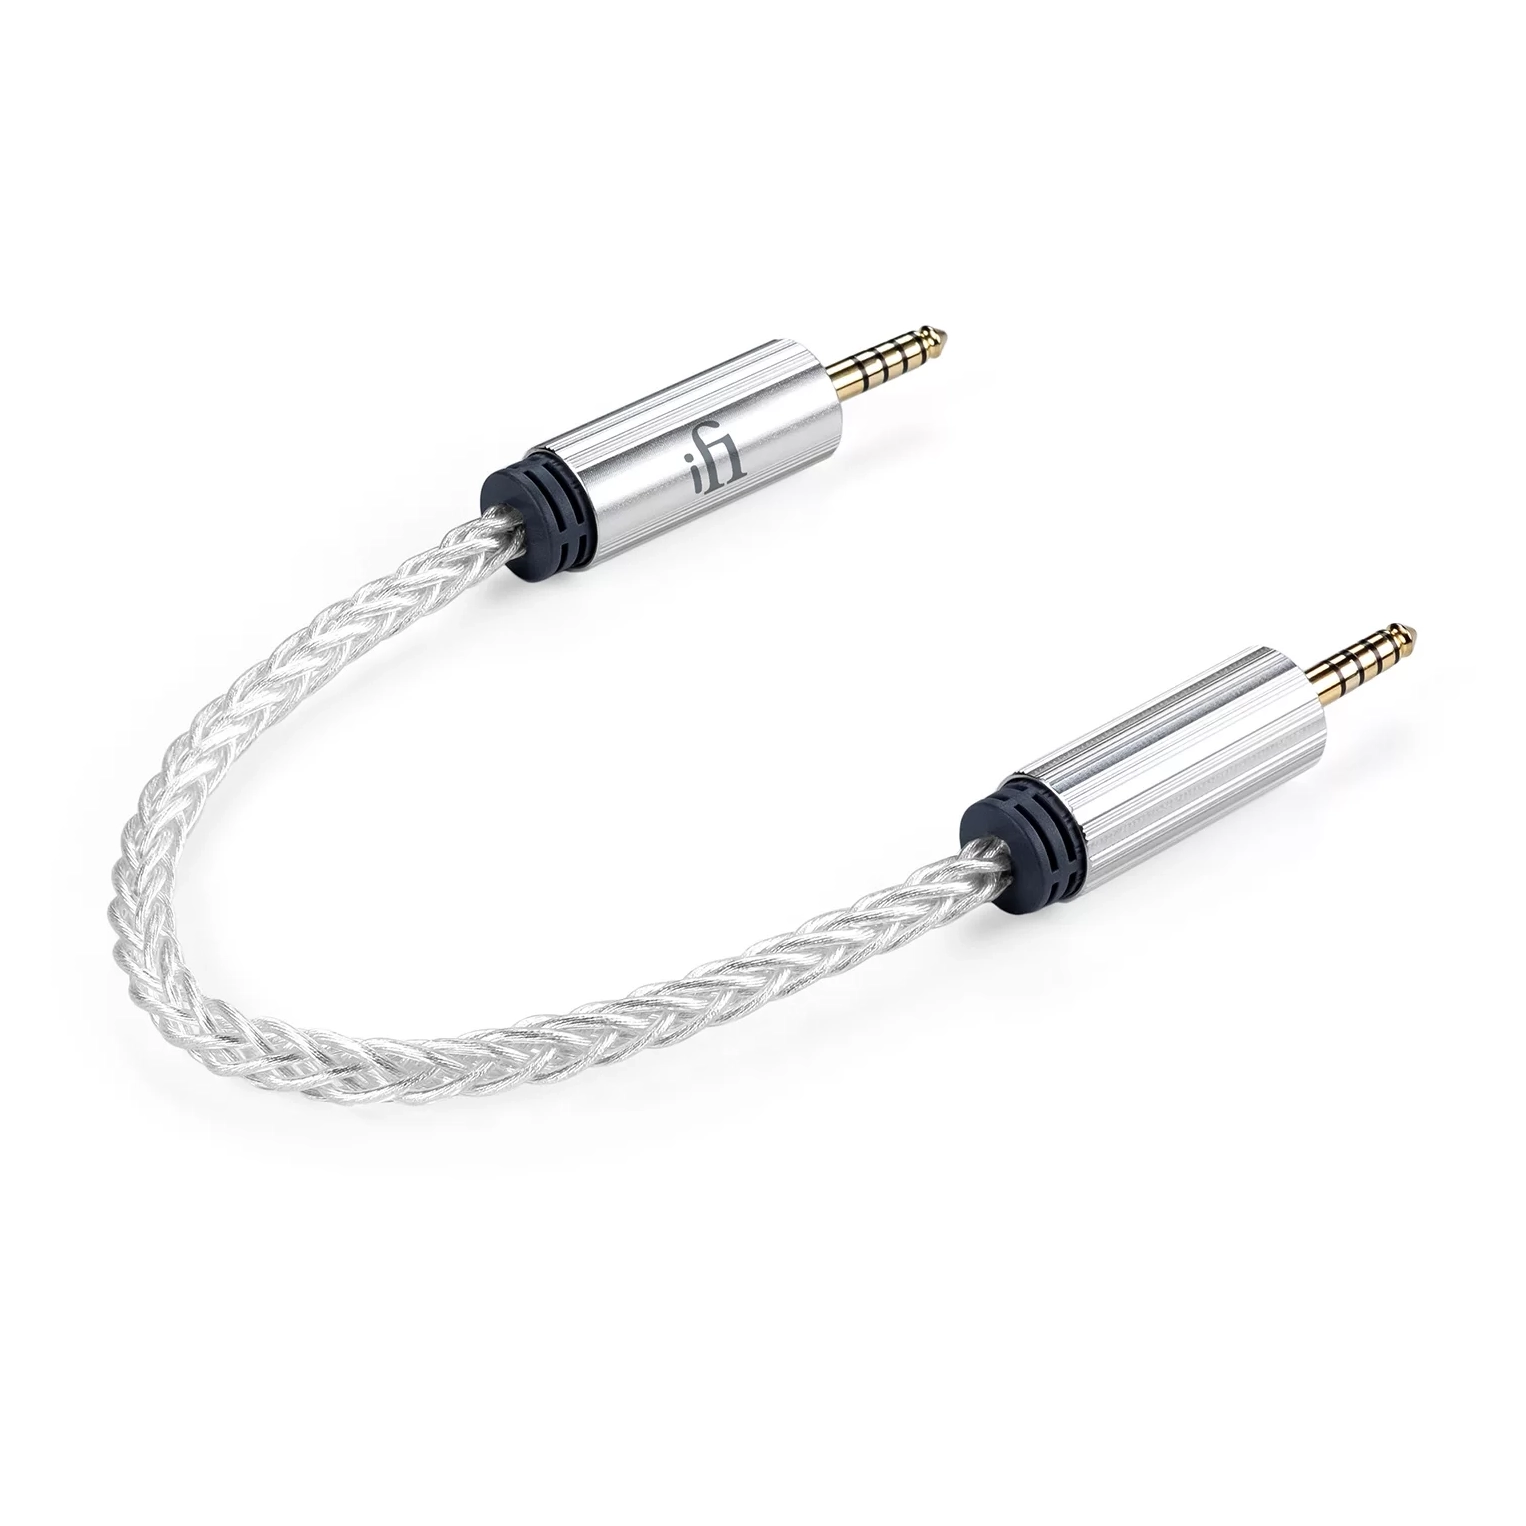 iFi 4.4mm to 4.4mm Cable